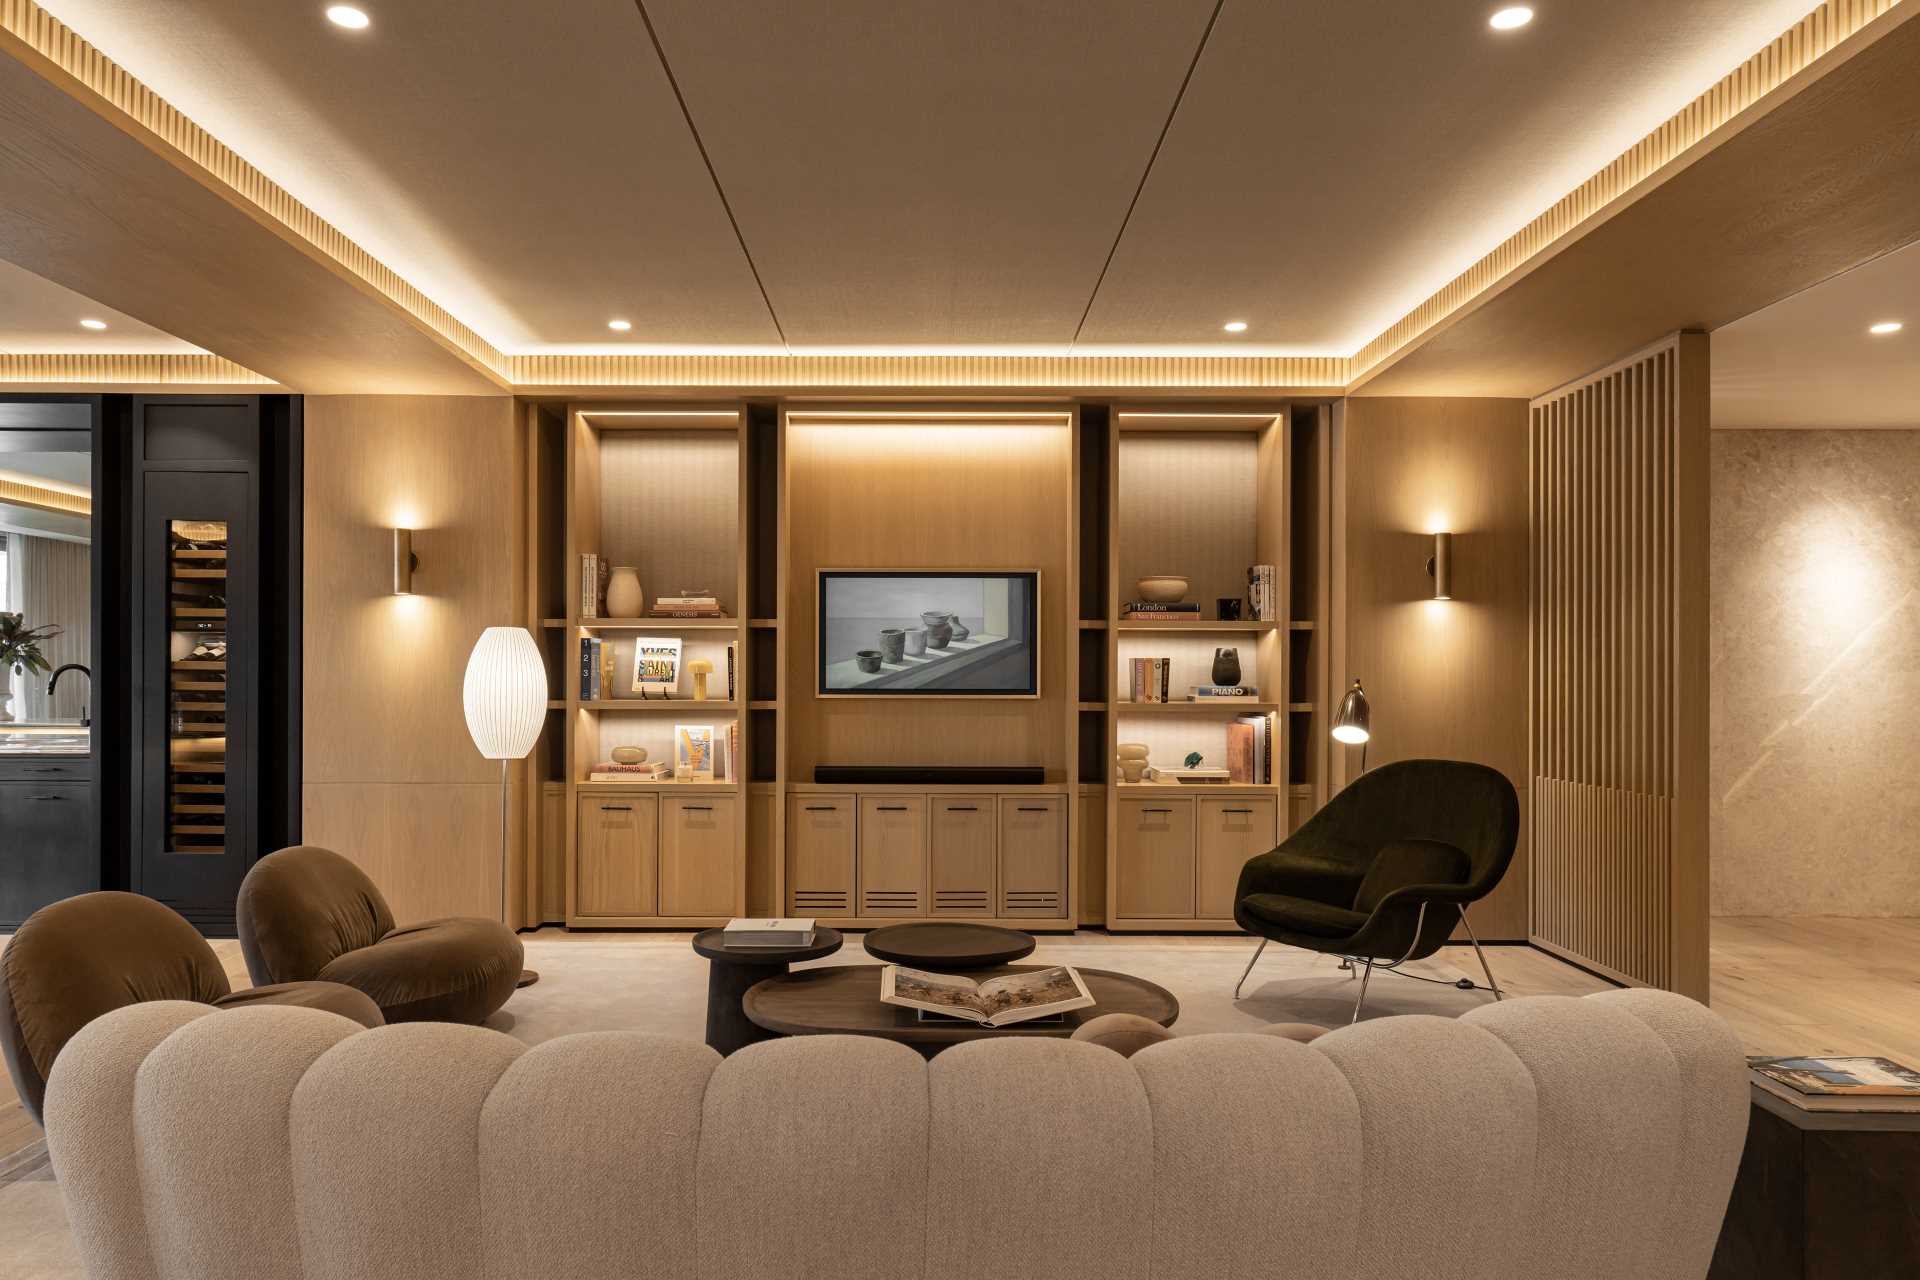 A modern living room with bespoke cabinetry and hidden lighting.